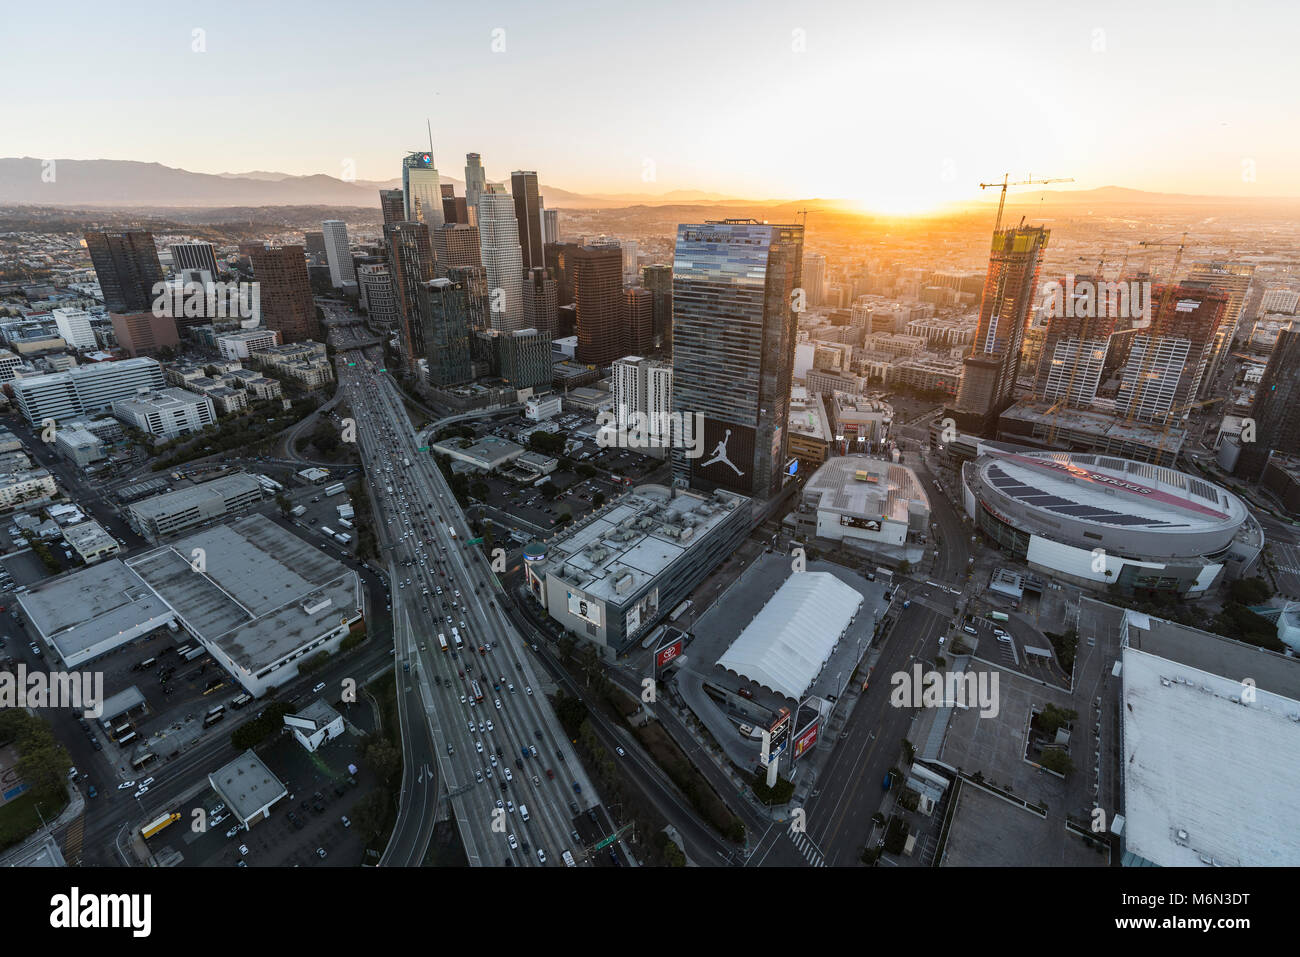 Los Angeles, California, USA - February 20, 2018:  Cityscape sunrise aerial view of towers, streets and freeway in the urban core of downtown LA. Stock Photo